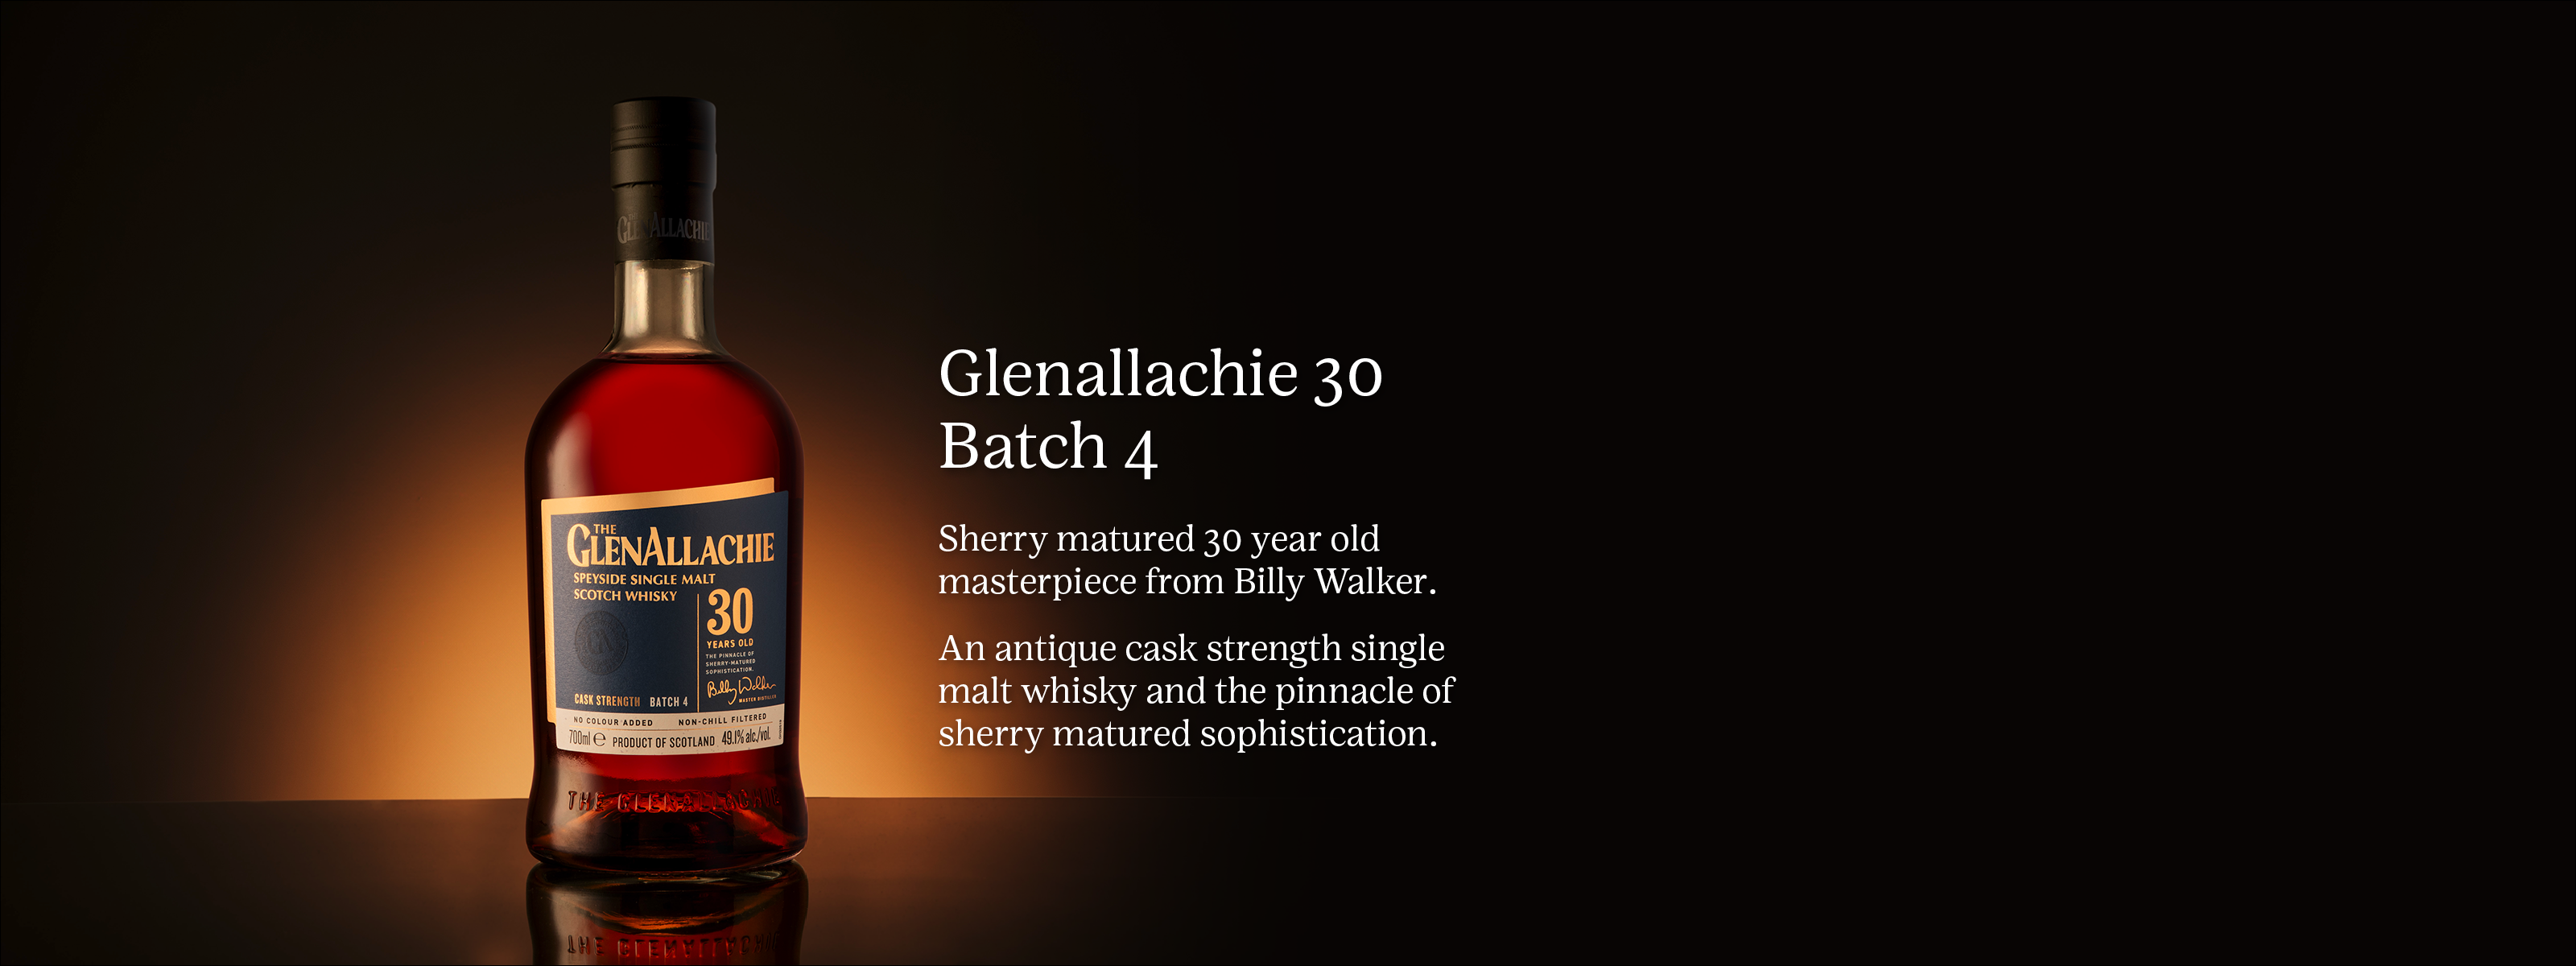 Glenallchie 30 bottle on a golden background - Glenallachie 30 Batch 4 Sherry matured 30 year old masterpiece from Billy Walker. An antique cask strength single malt whisky and the pinnacle of sherry matured sophistication.